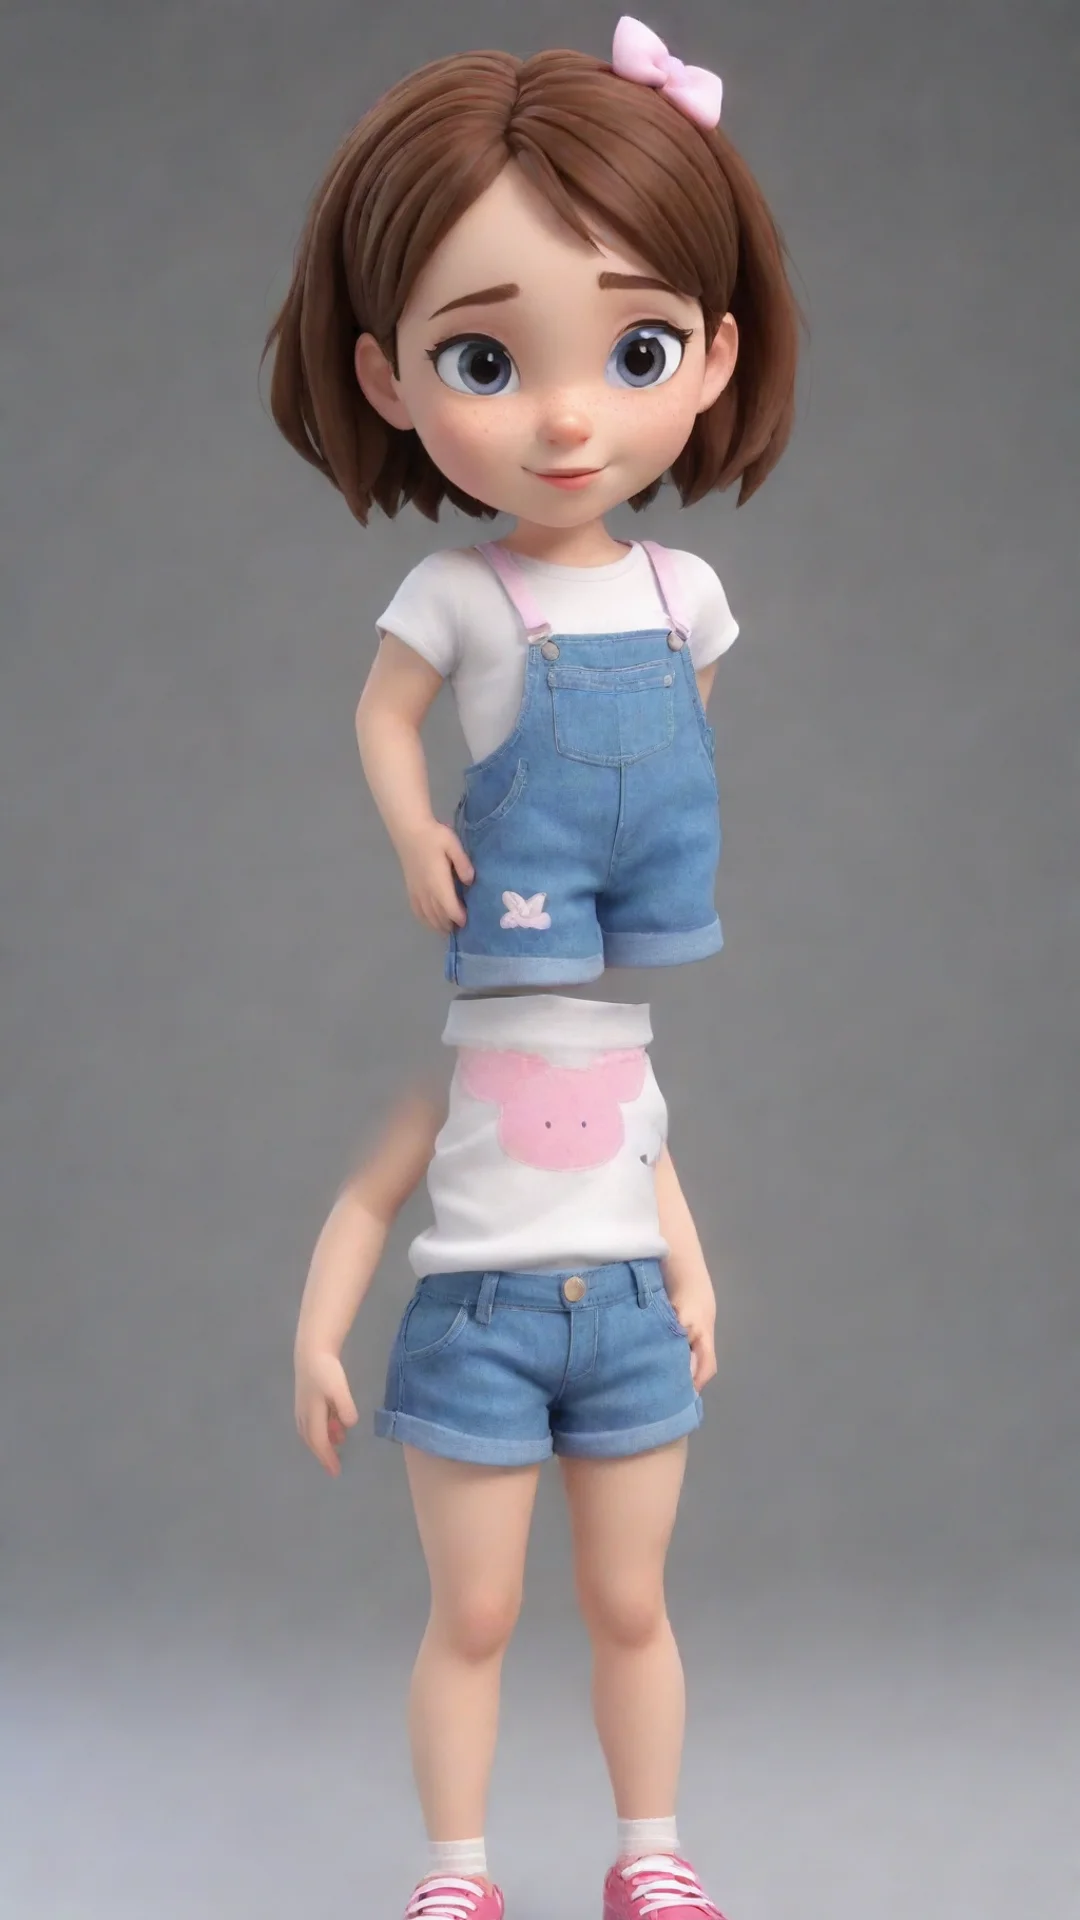 aiamazing little girl in shorts cartoon 3d awesome portrait 2 hdtall